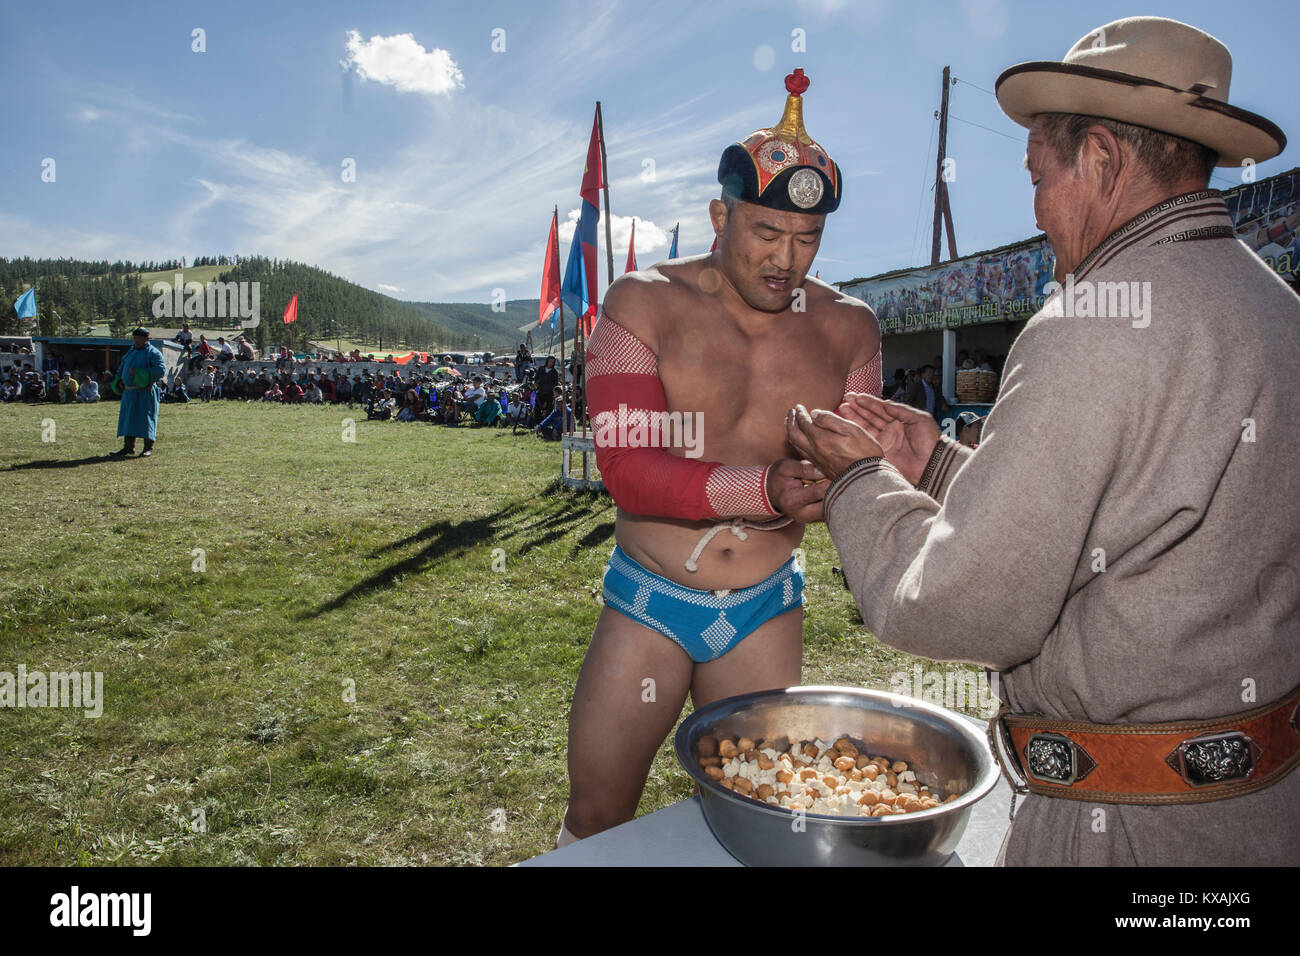 A Mongol wrestler, full of pride, grabbing a handful of the cheese which he will toss into the sky and out to the crowd of his admirers. Annual Naadam Festival in Tsetserleg, Arkhangai Province, Mongolia Stock Photo